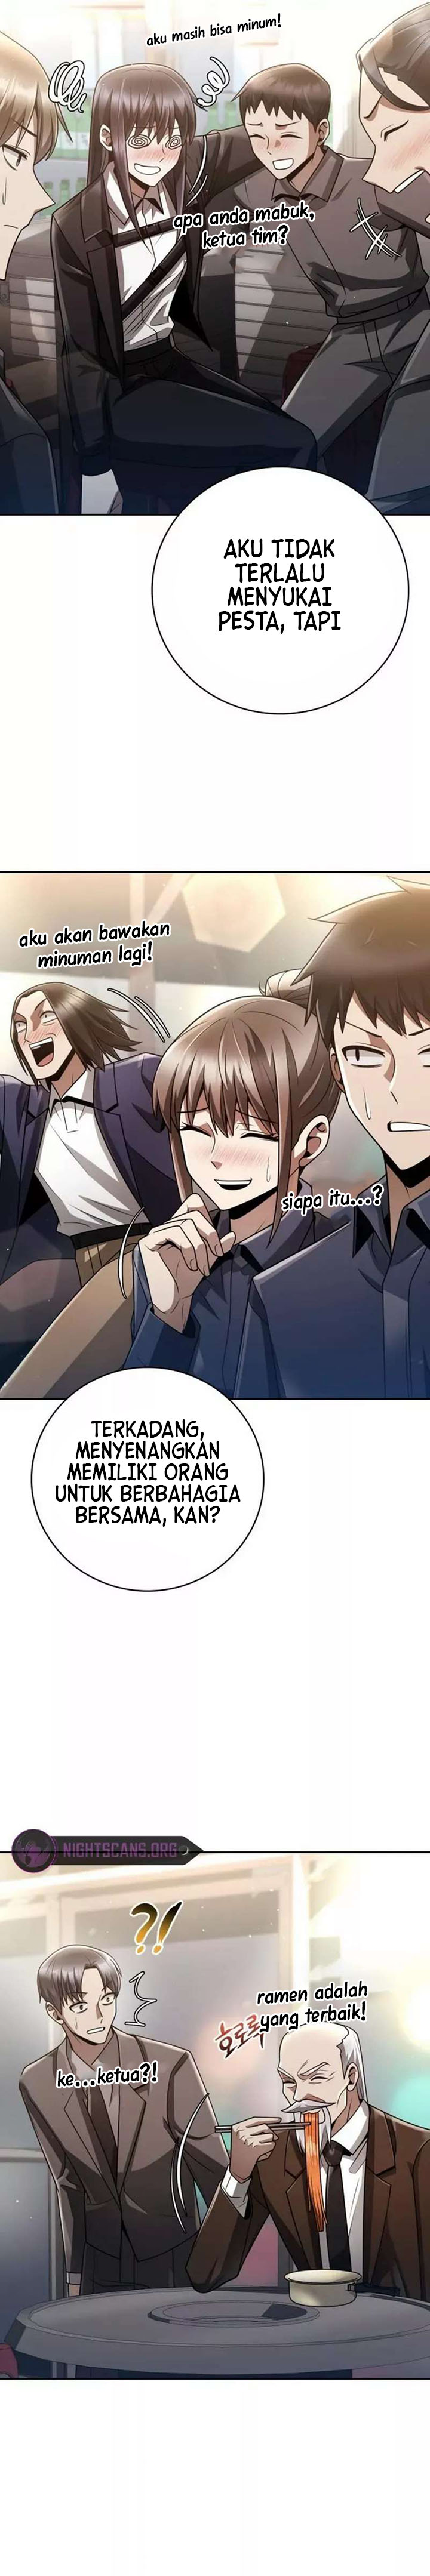 Dilarang COPAS - situs resmi www.mangacanblog.com - Komik clever cleaning life of the returned genius hunter 044 - chapter 44 45 Indonesia clever cleaning life of the returned genius hunter 044 - chapter 44 Terbaru 27|Baca Manga Komik Indonesia|Mangacan